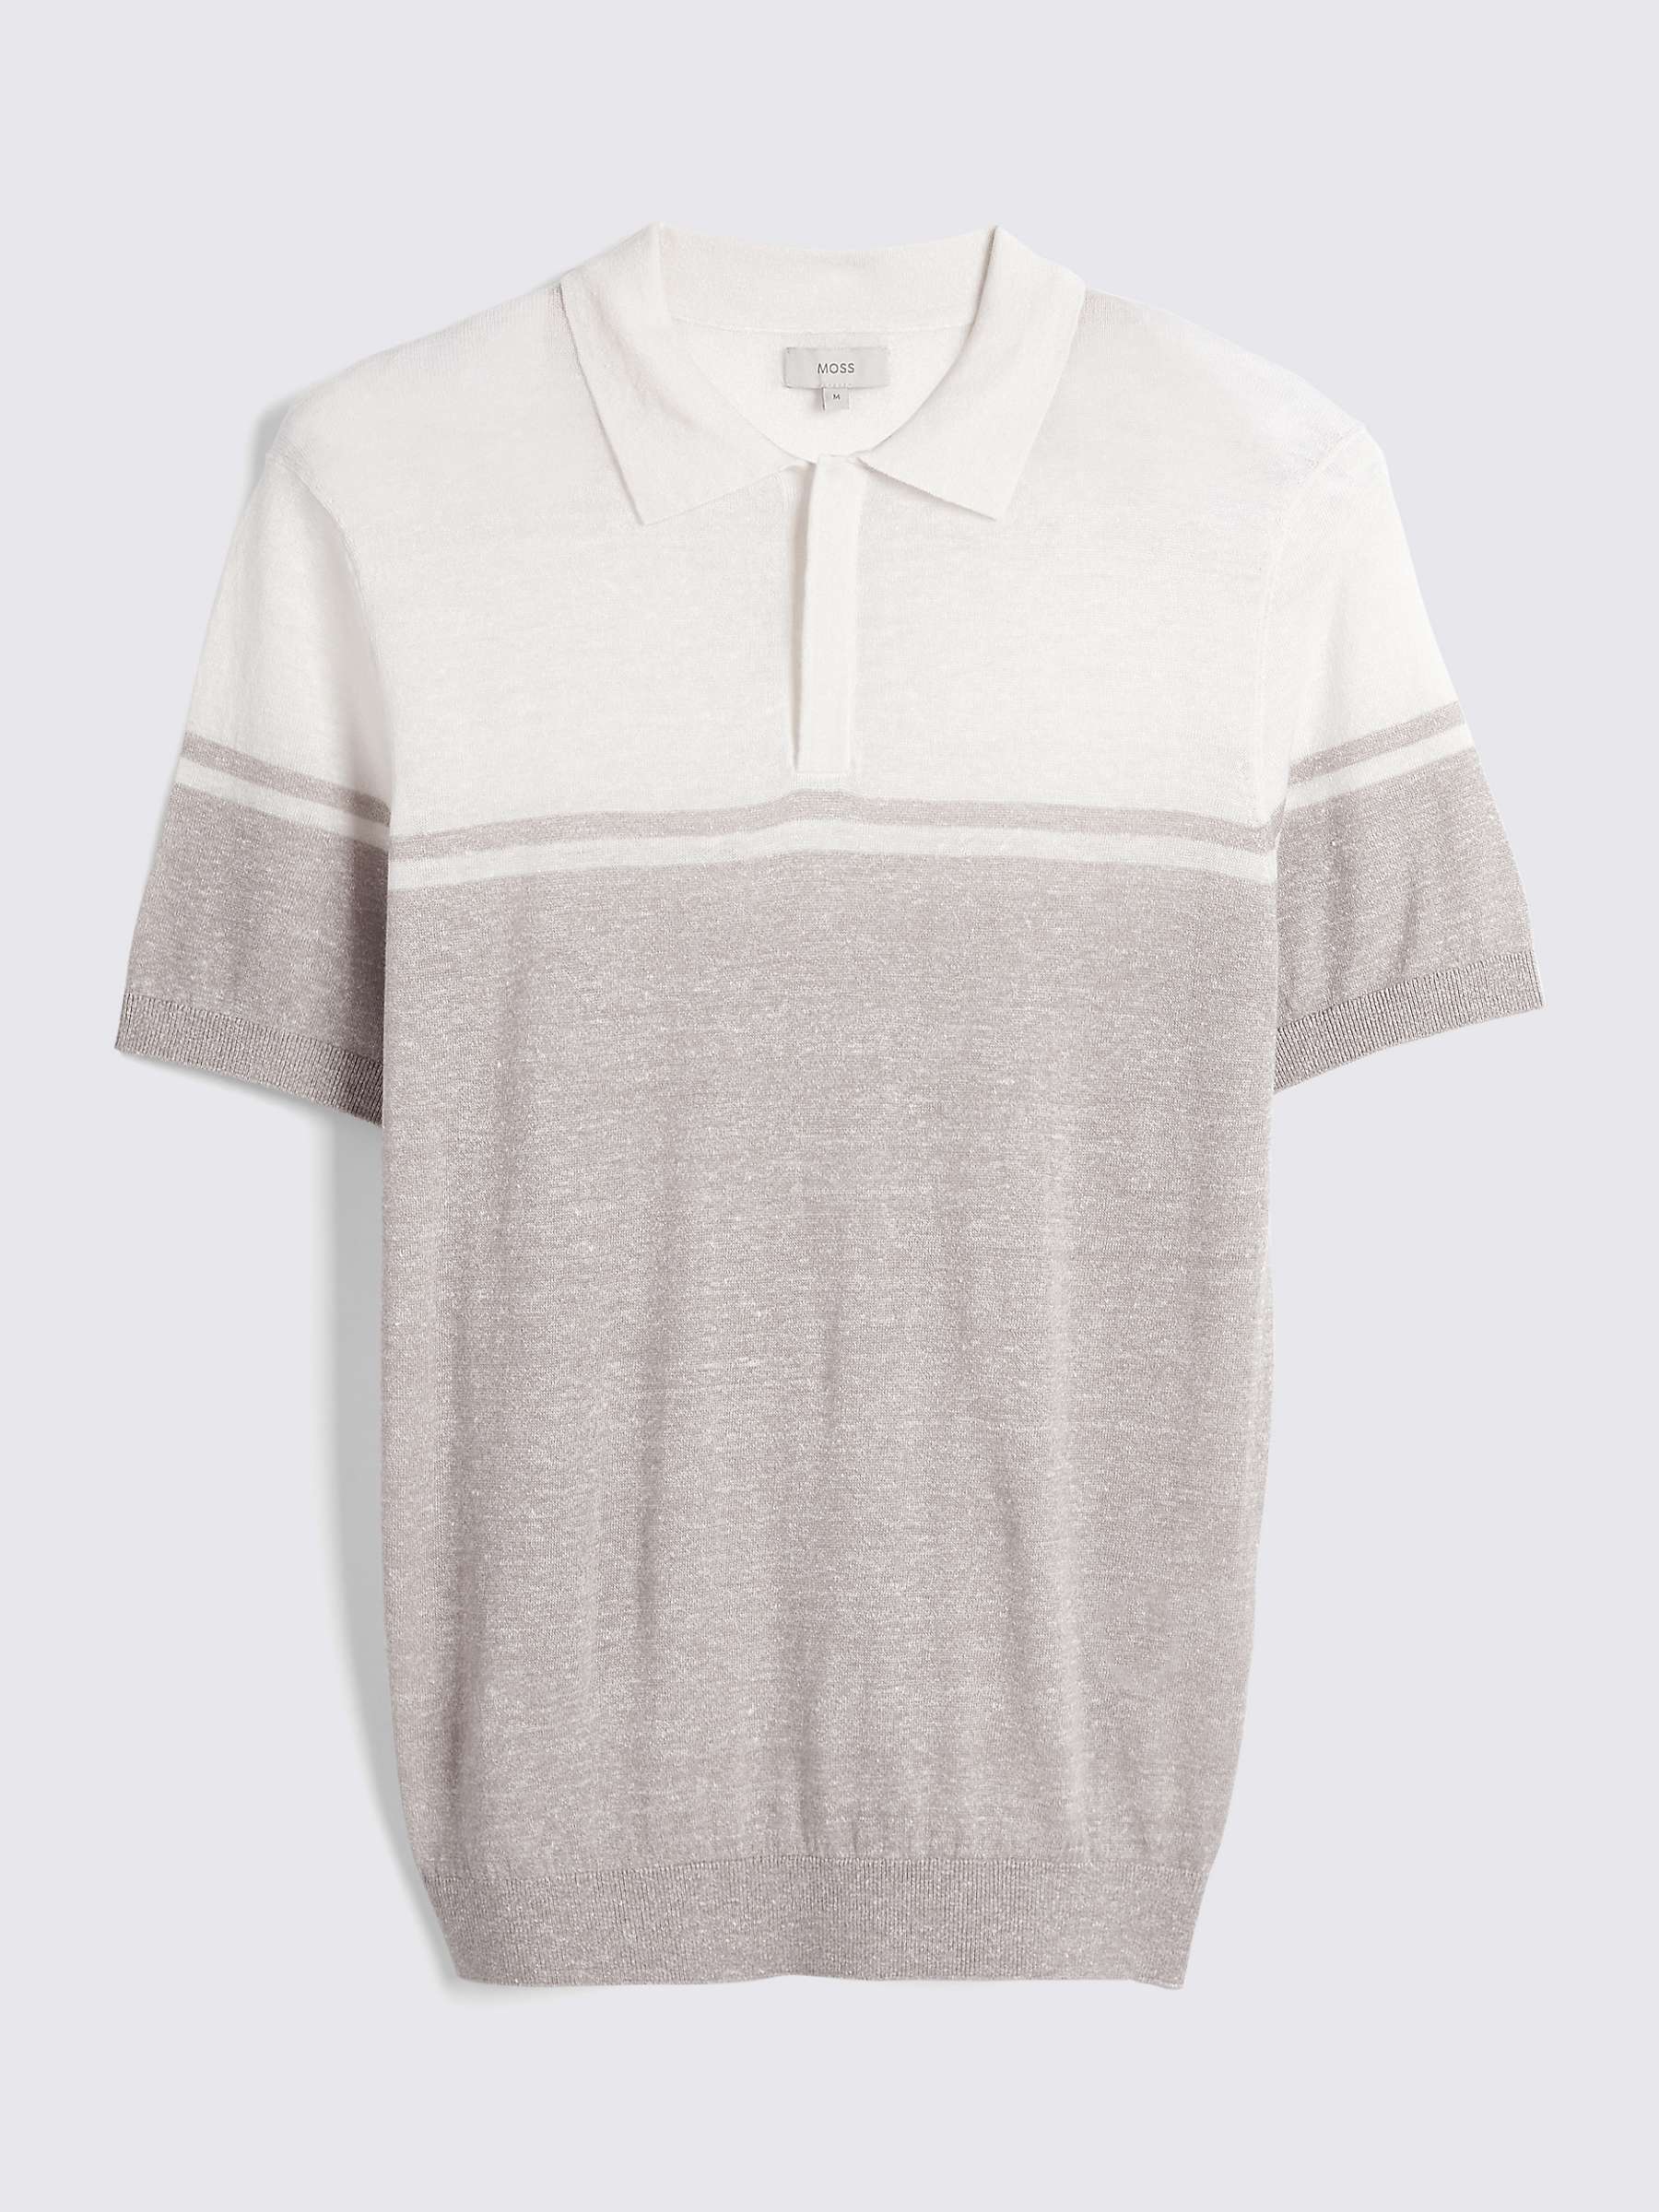 Buy Moss Stripe Wool and Linen Blend Polo Top, Beige Online at johnlewis.com